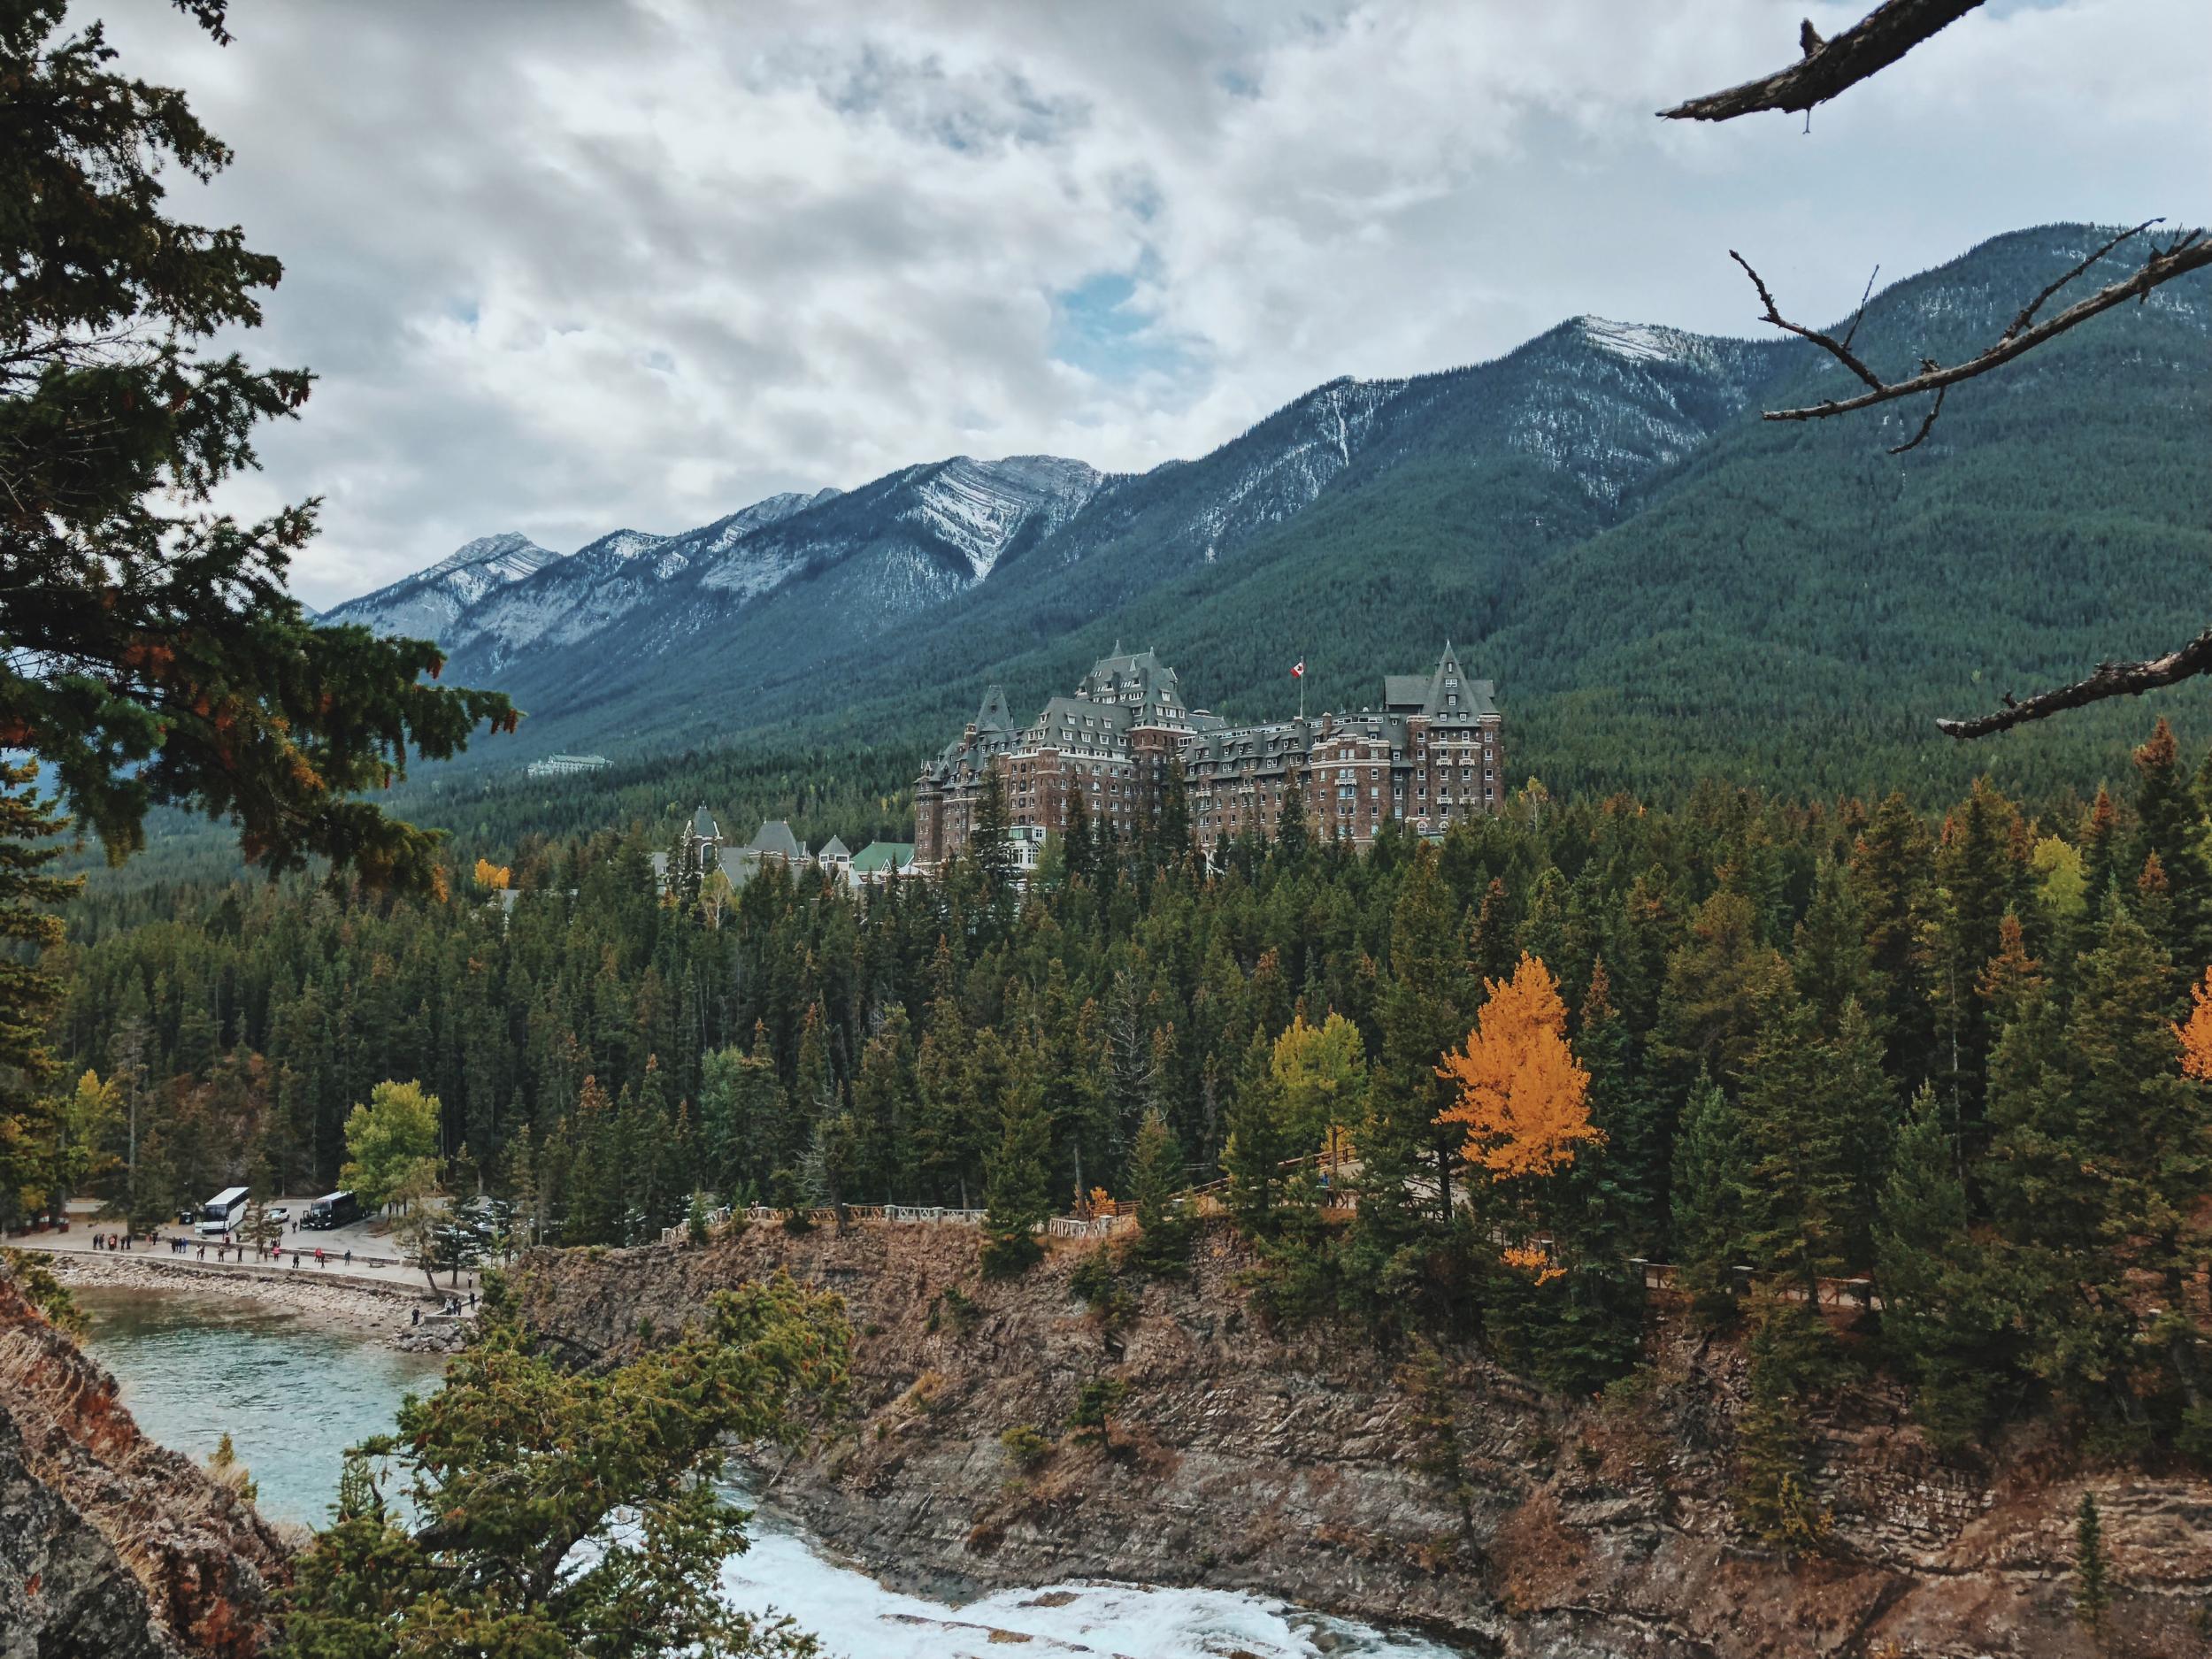 The Fairmont Banff Springs Hotel, which hosted the royals in 1939